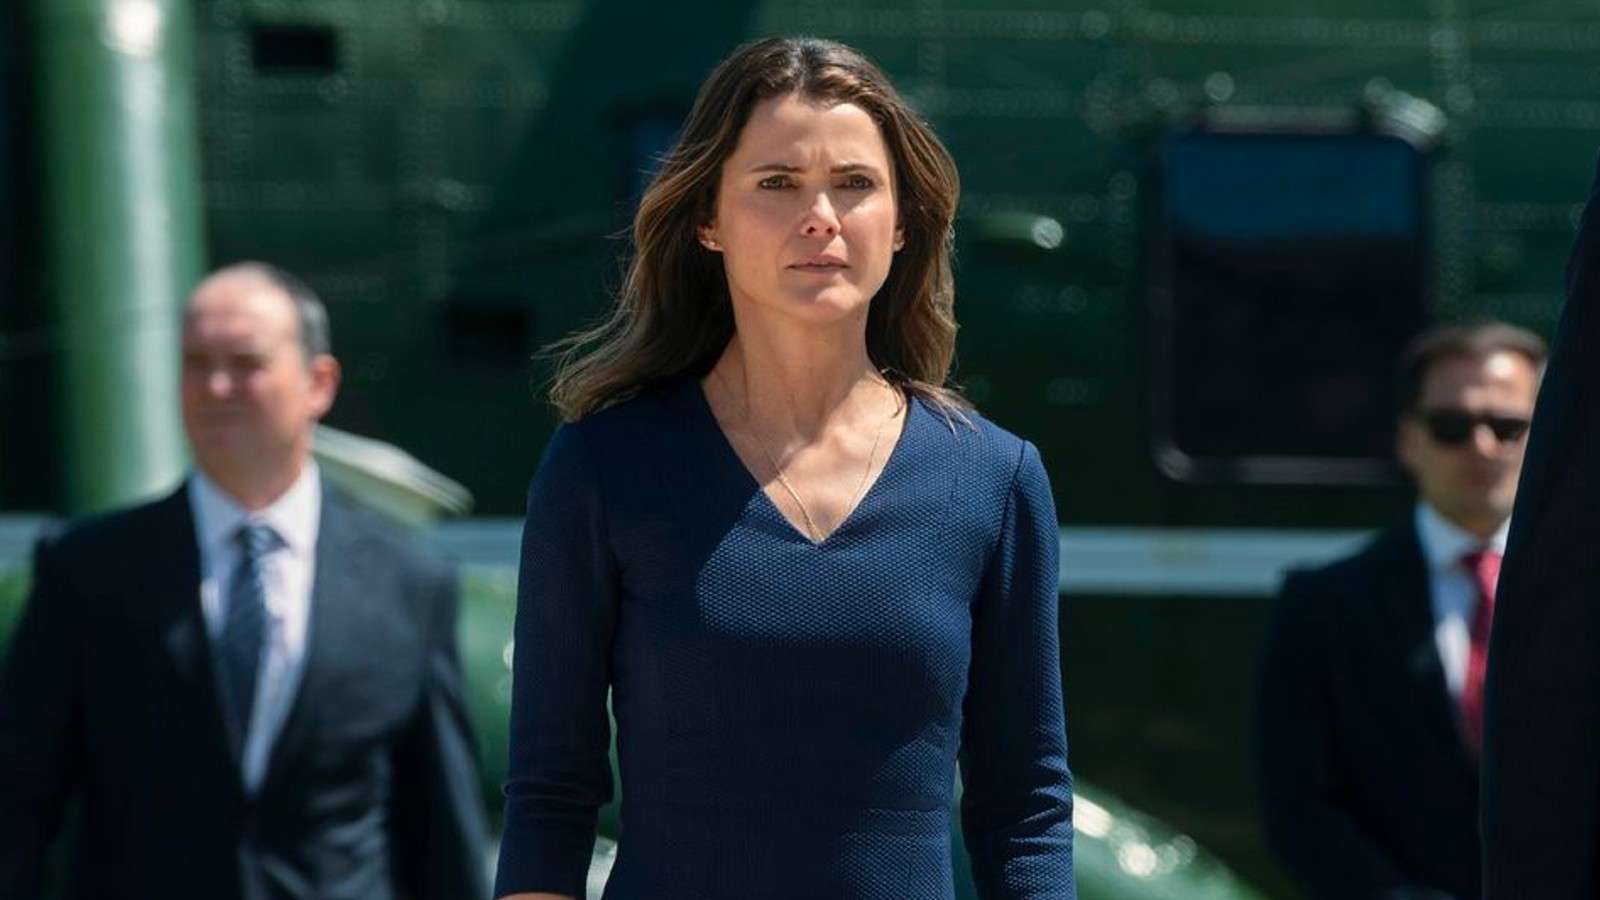 Keri Russell as Kate Wyler in The Diplomat, which is returning for Season 2